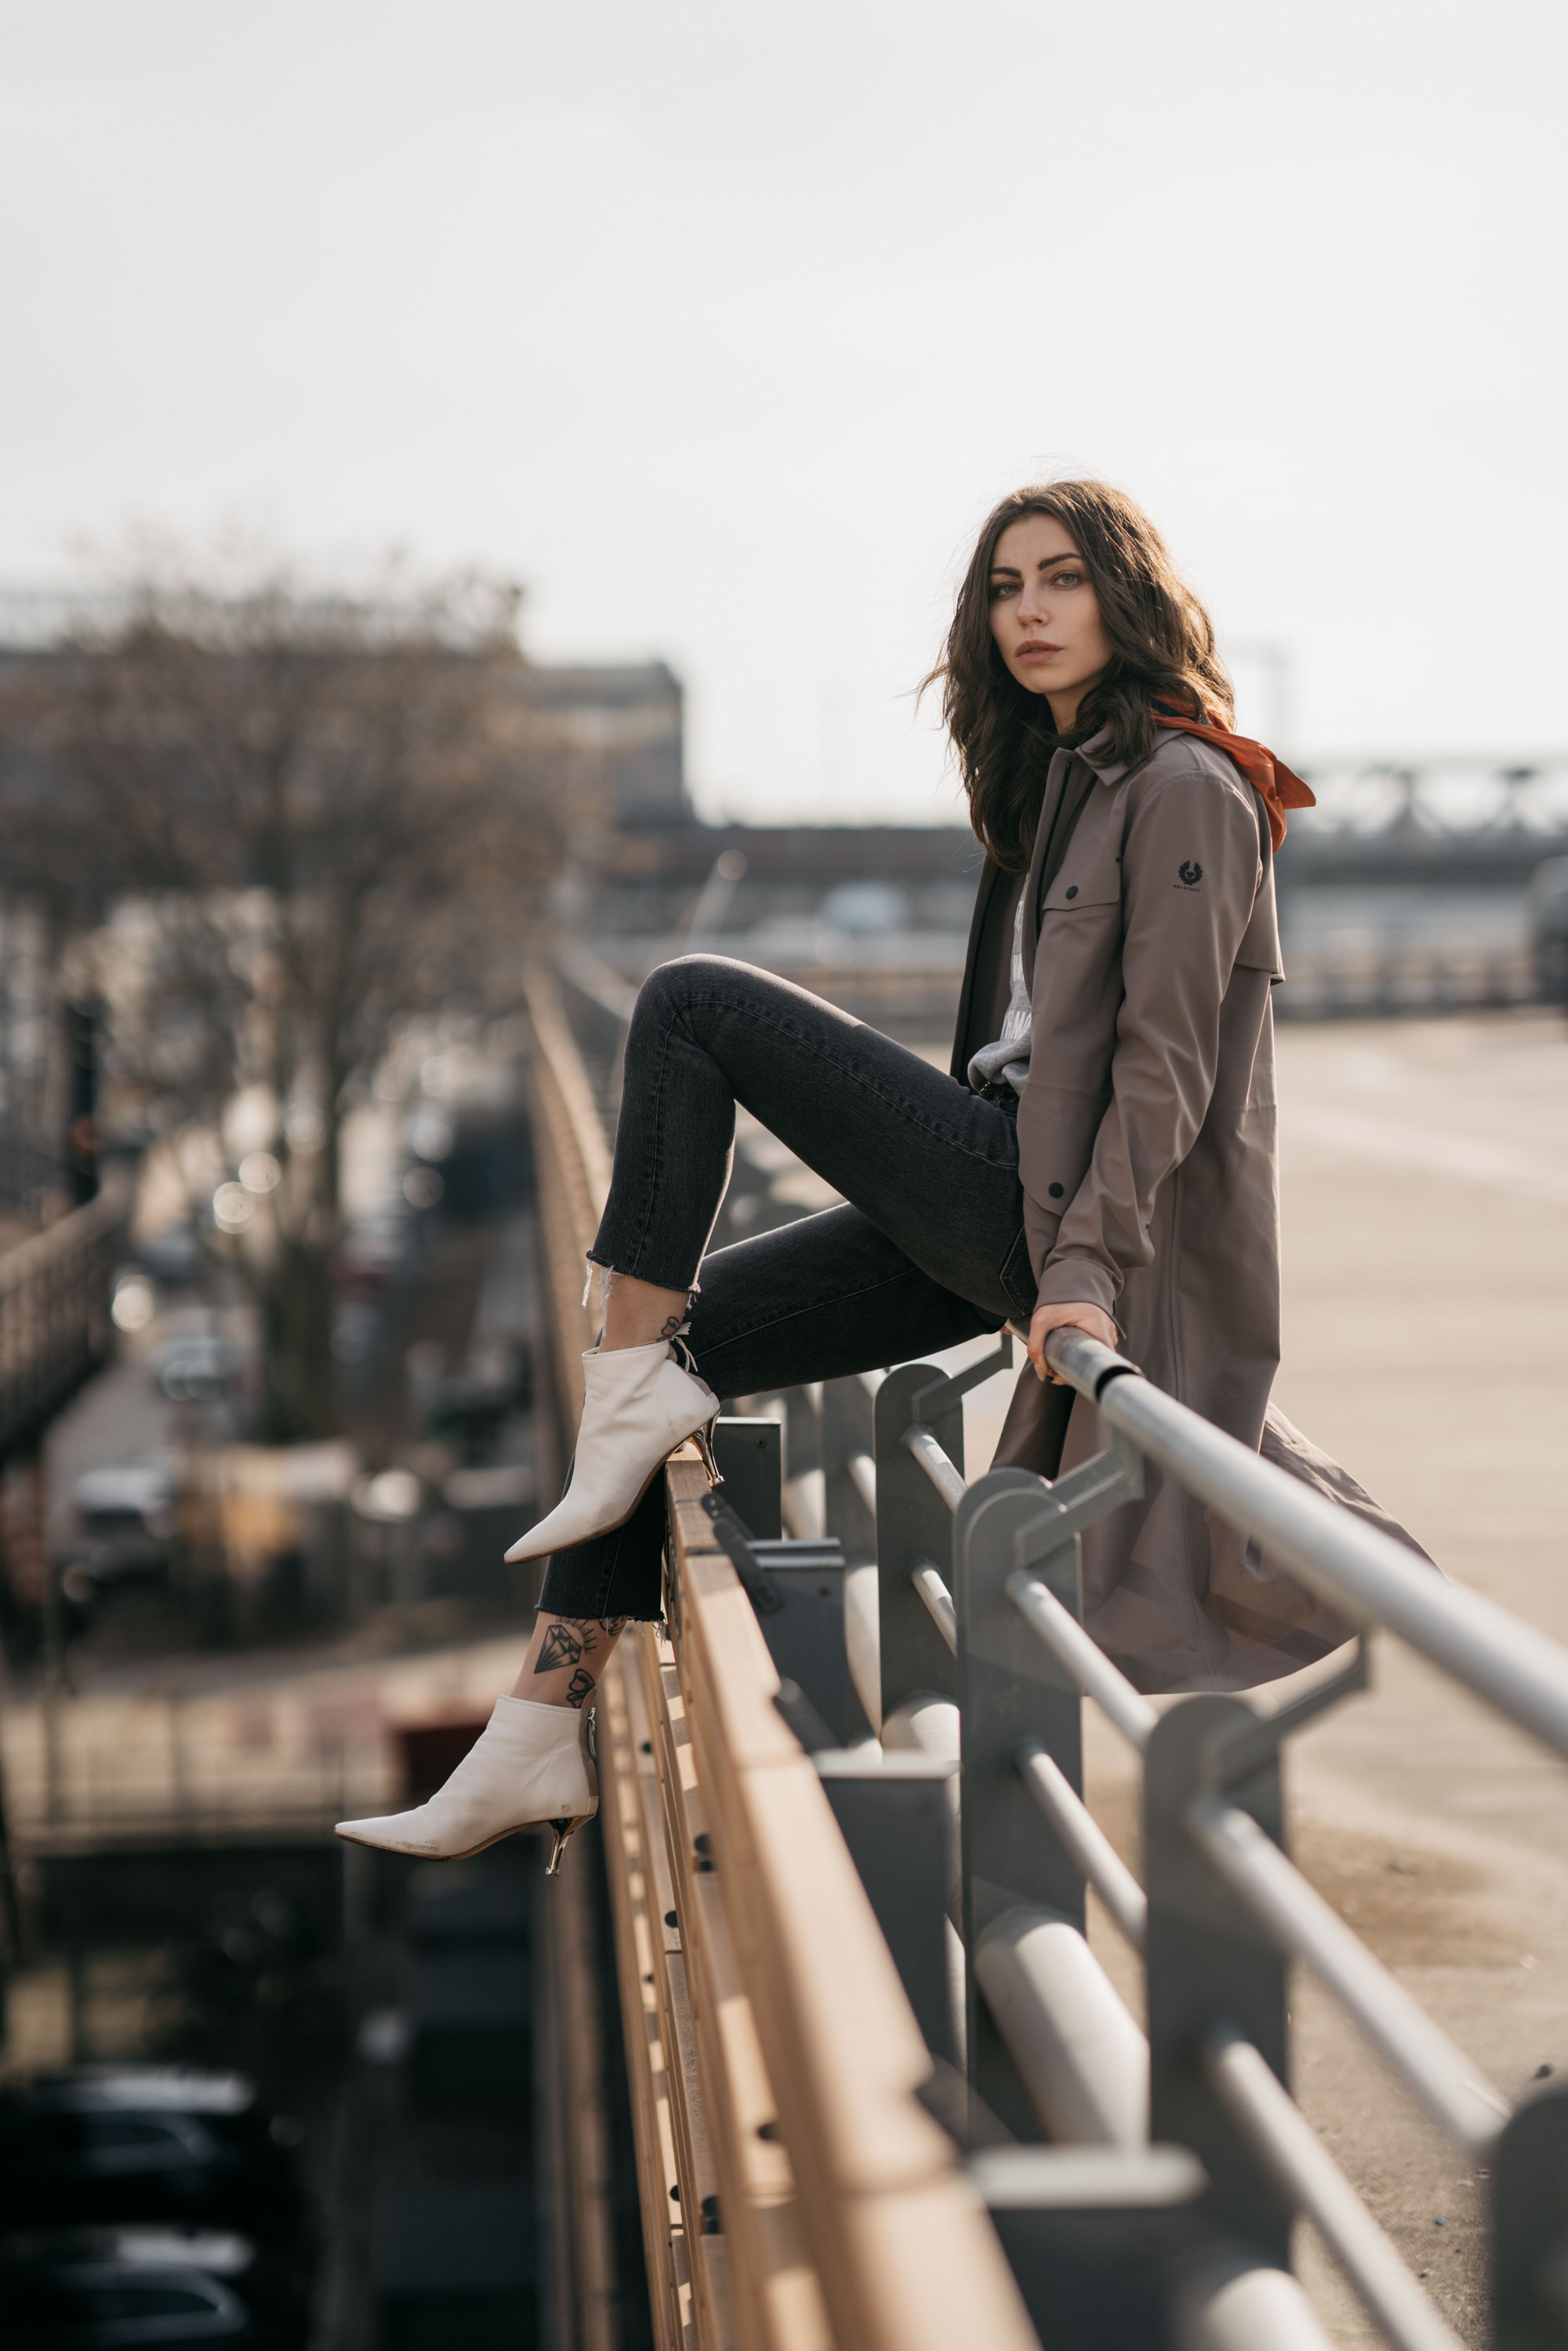 Street Style in Berlin | brands: Belstaff, AGL shoes, Levi's 501 | Trend: rain coat, white boots | BVG | parking lot | shooting | fashion | outfit | ootd